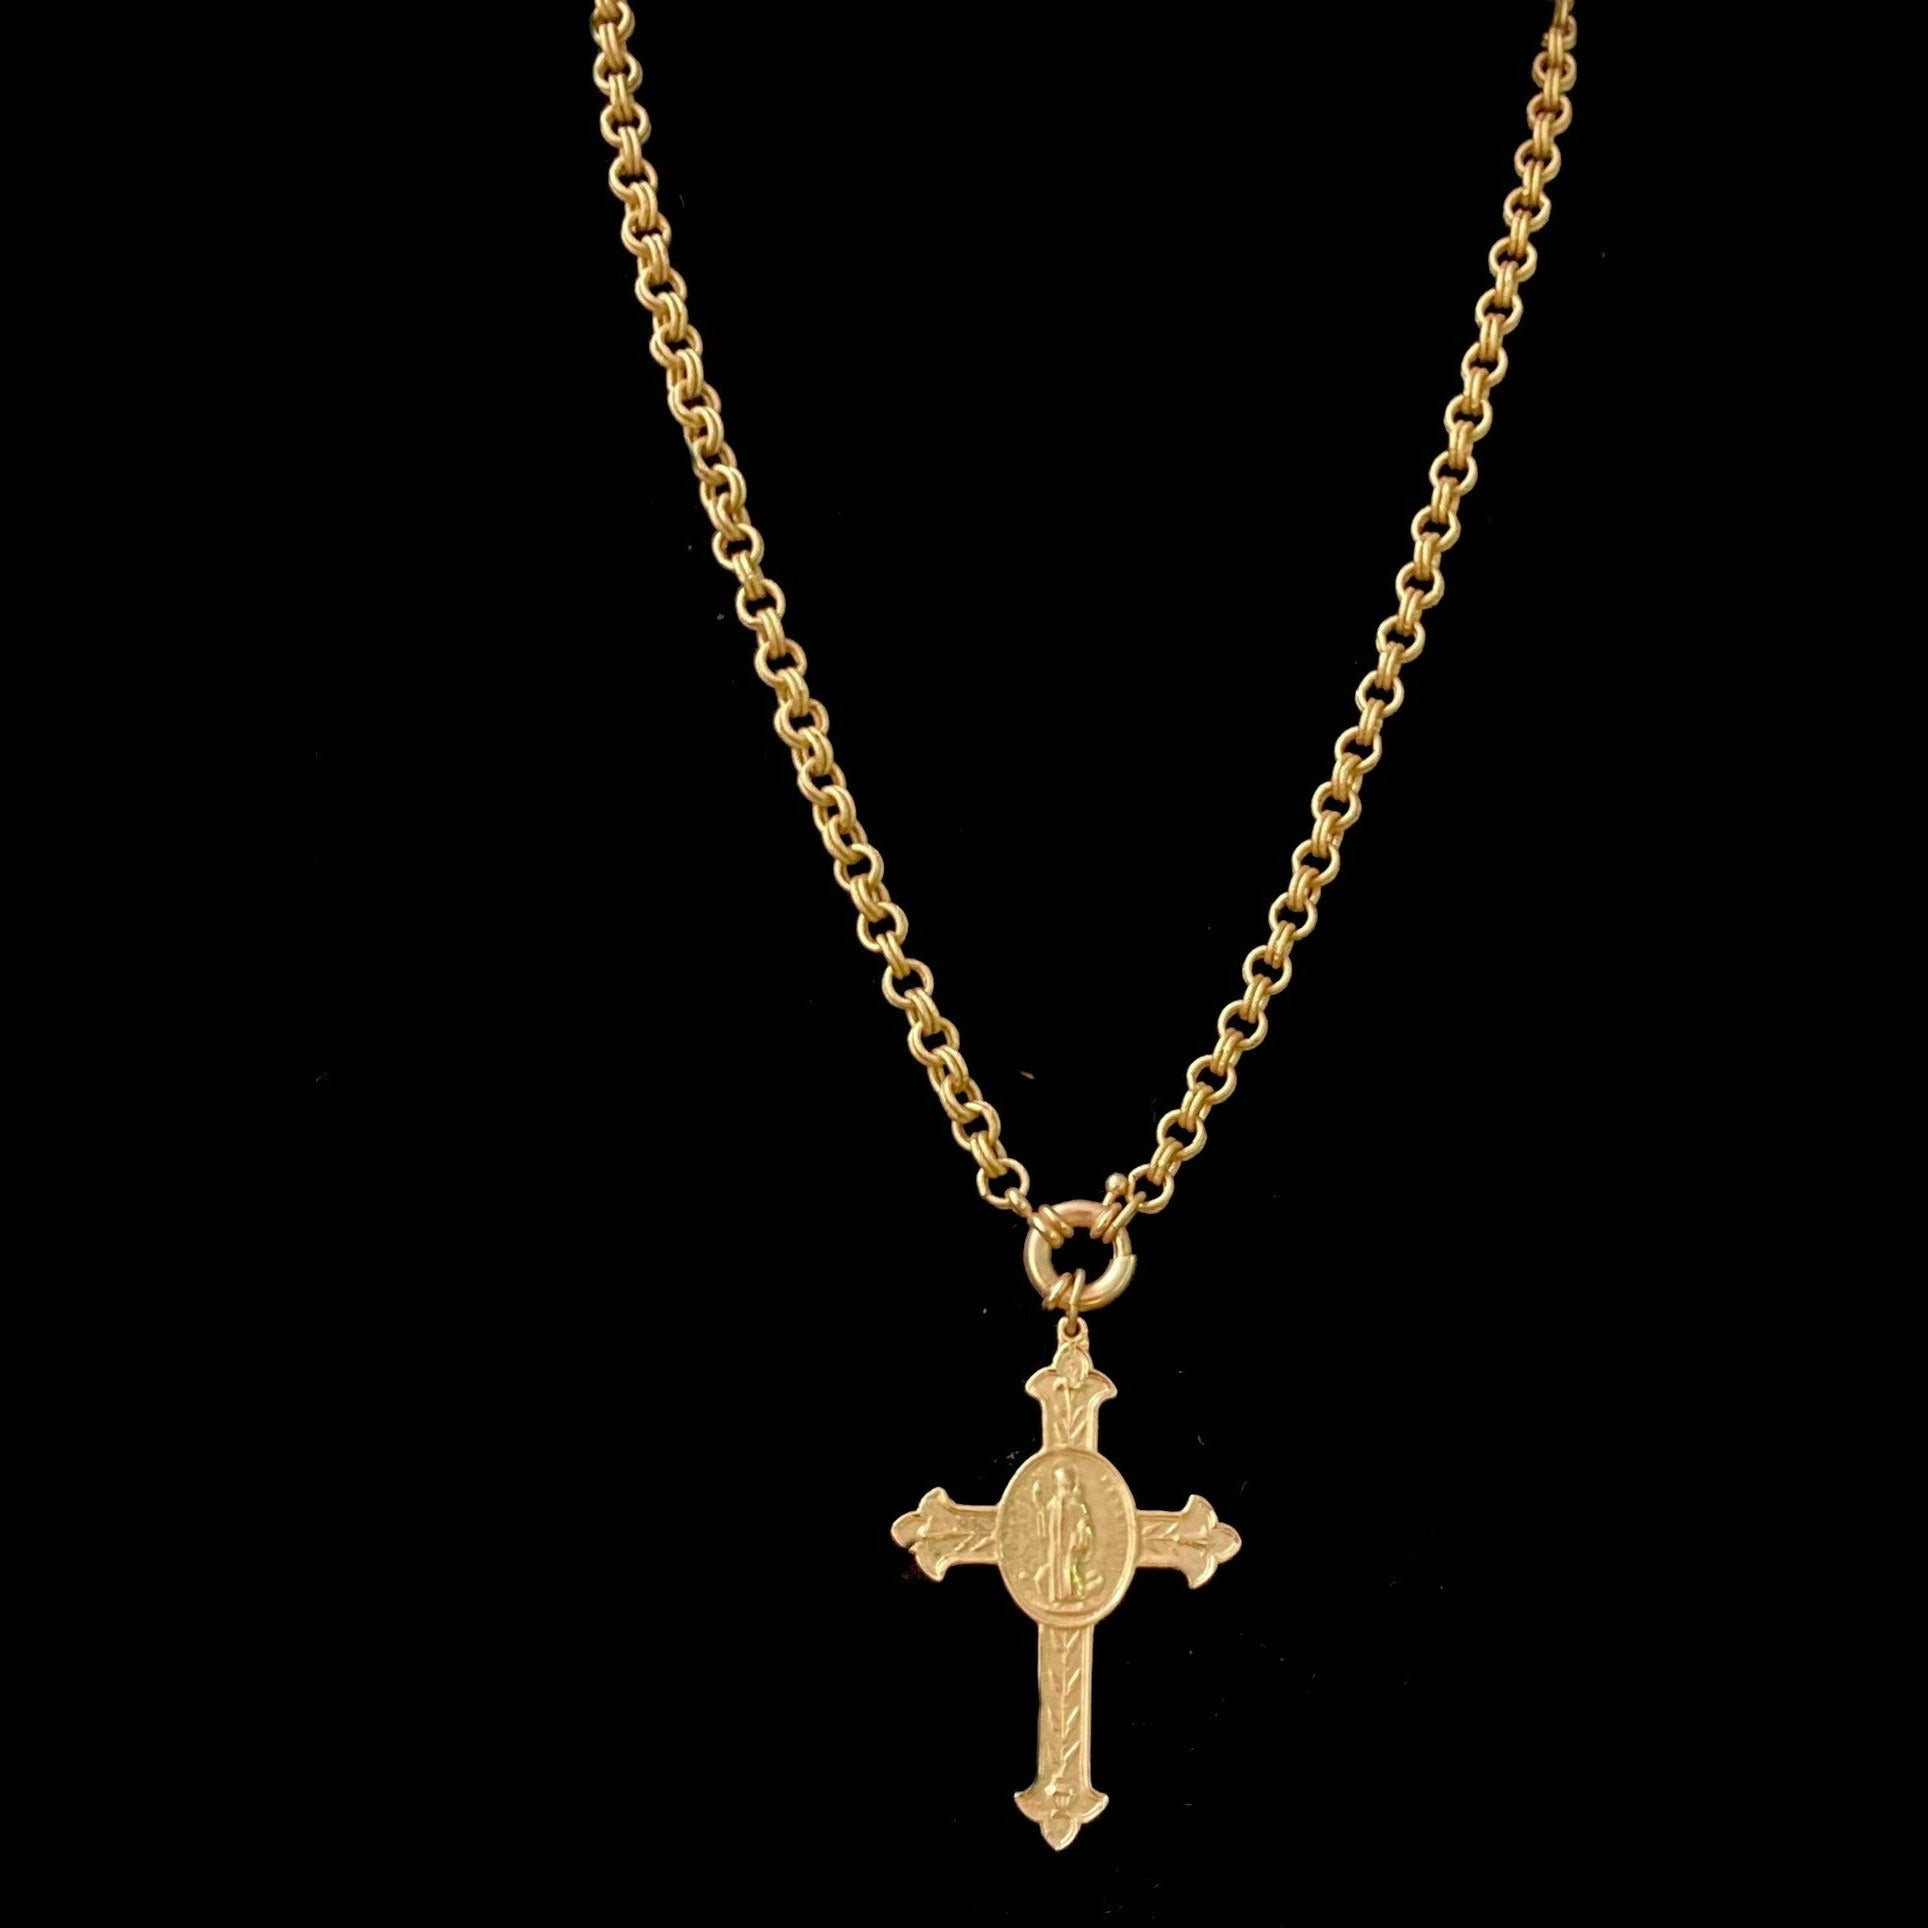 Cross of San Benito Medieval Chain  Necklace by Whispering Goddess - Gold